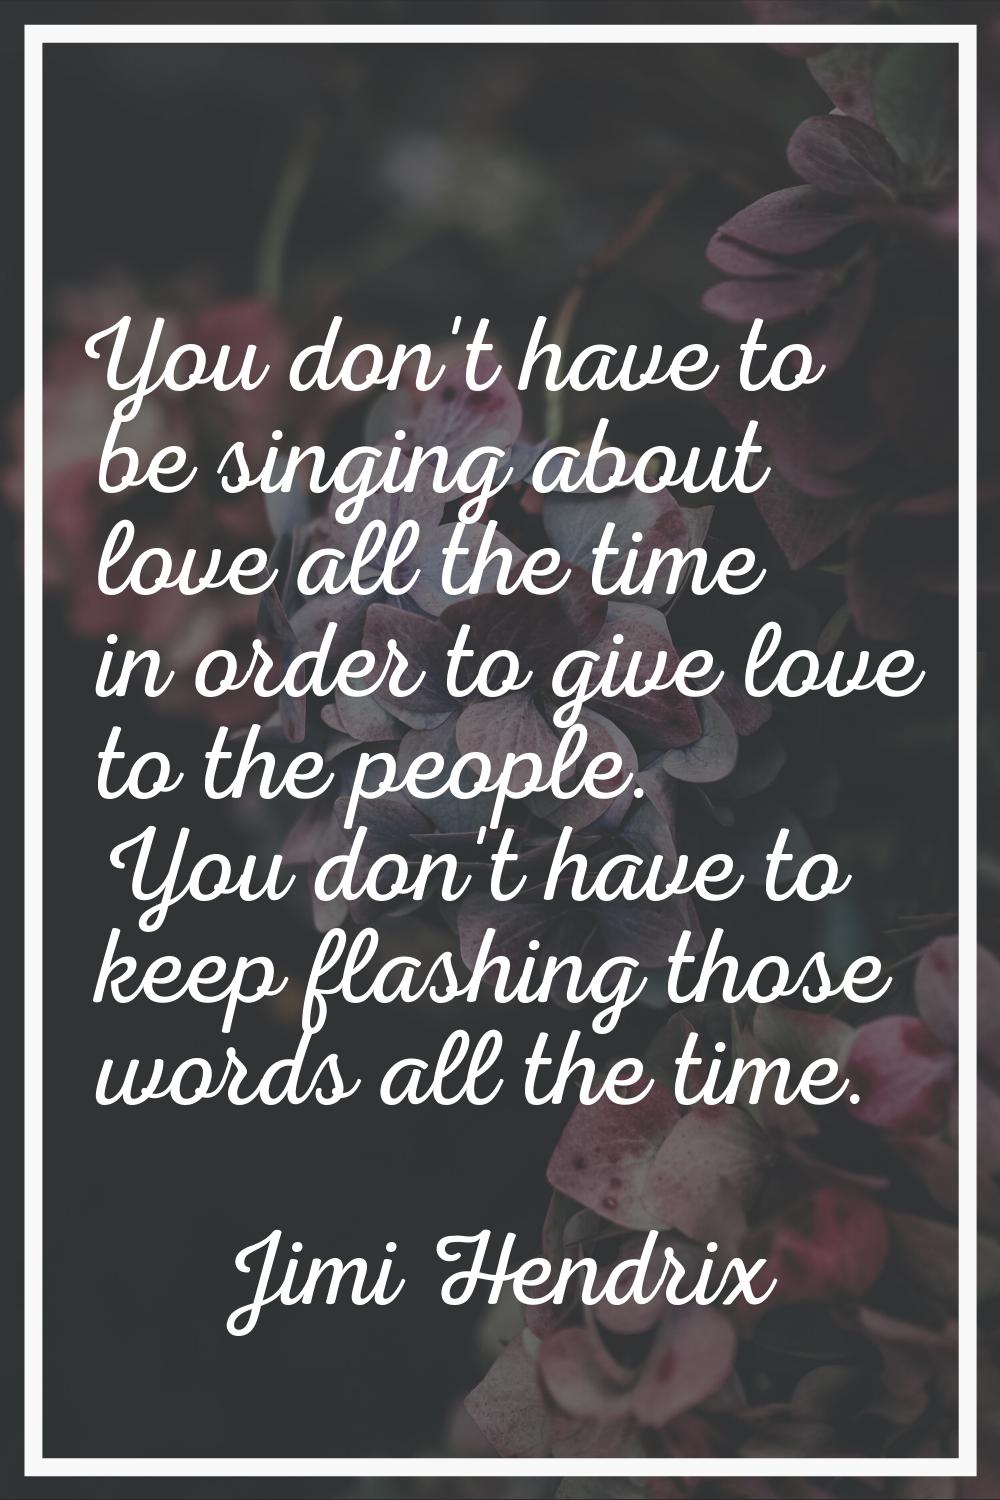 You don't have to be singing about love all the time in order to give love to the people. You don't